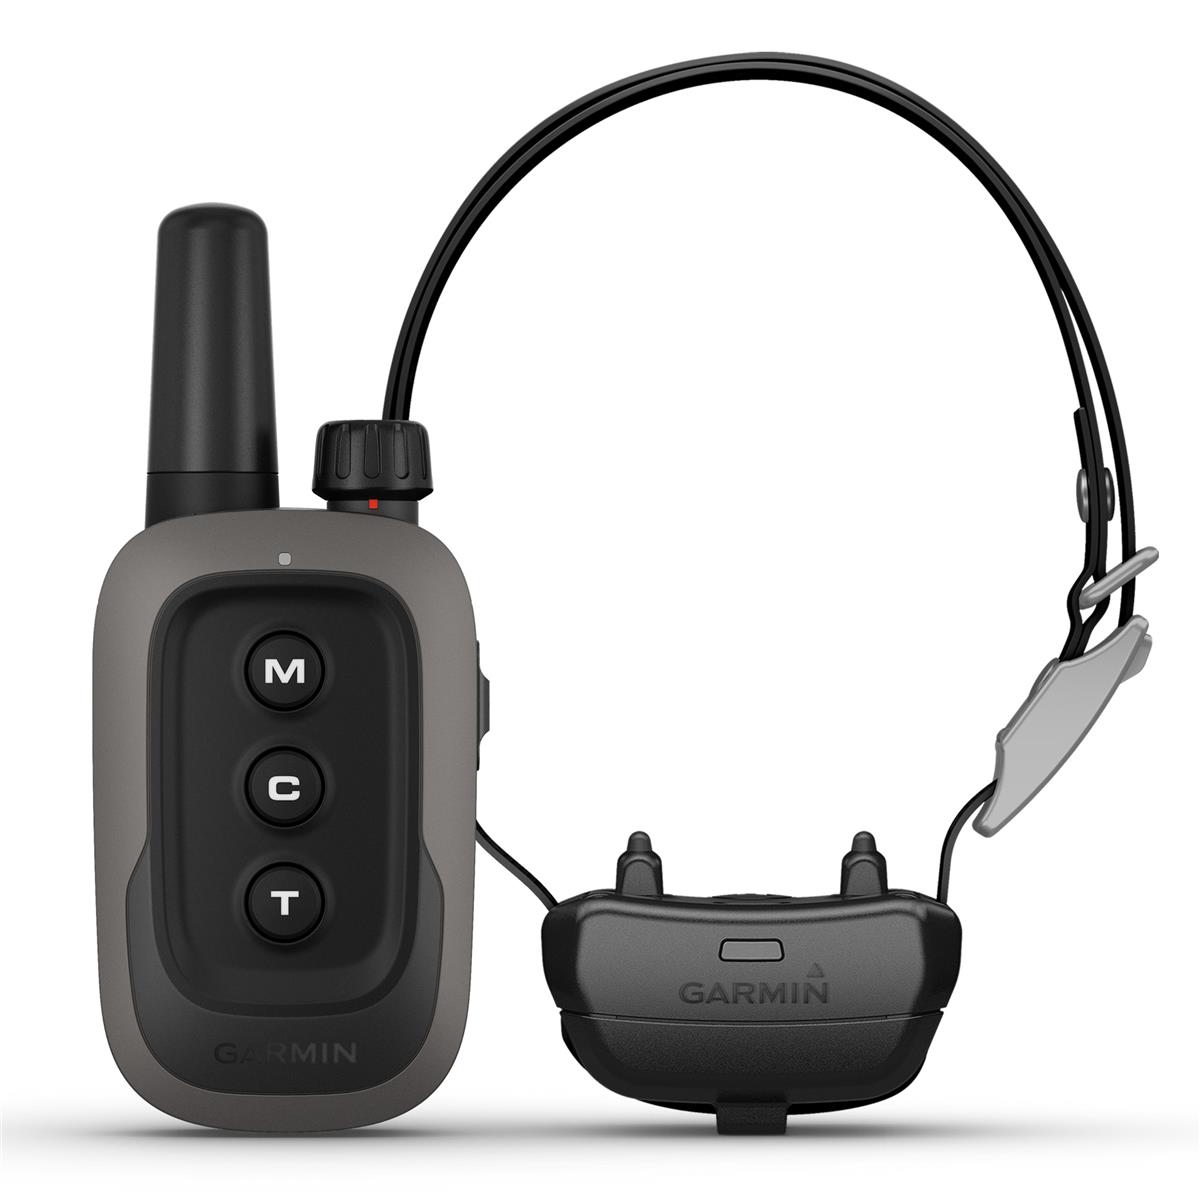 Image of Garmin Delta SE Dog Training System with Dog Collar and Handheld Device